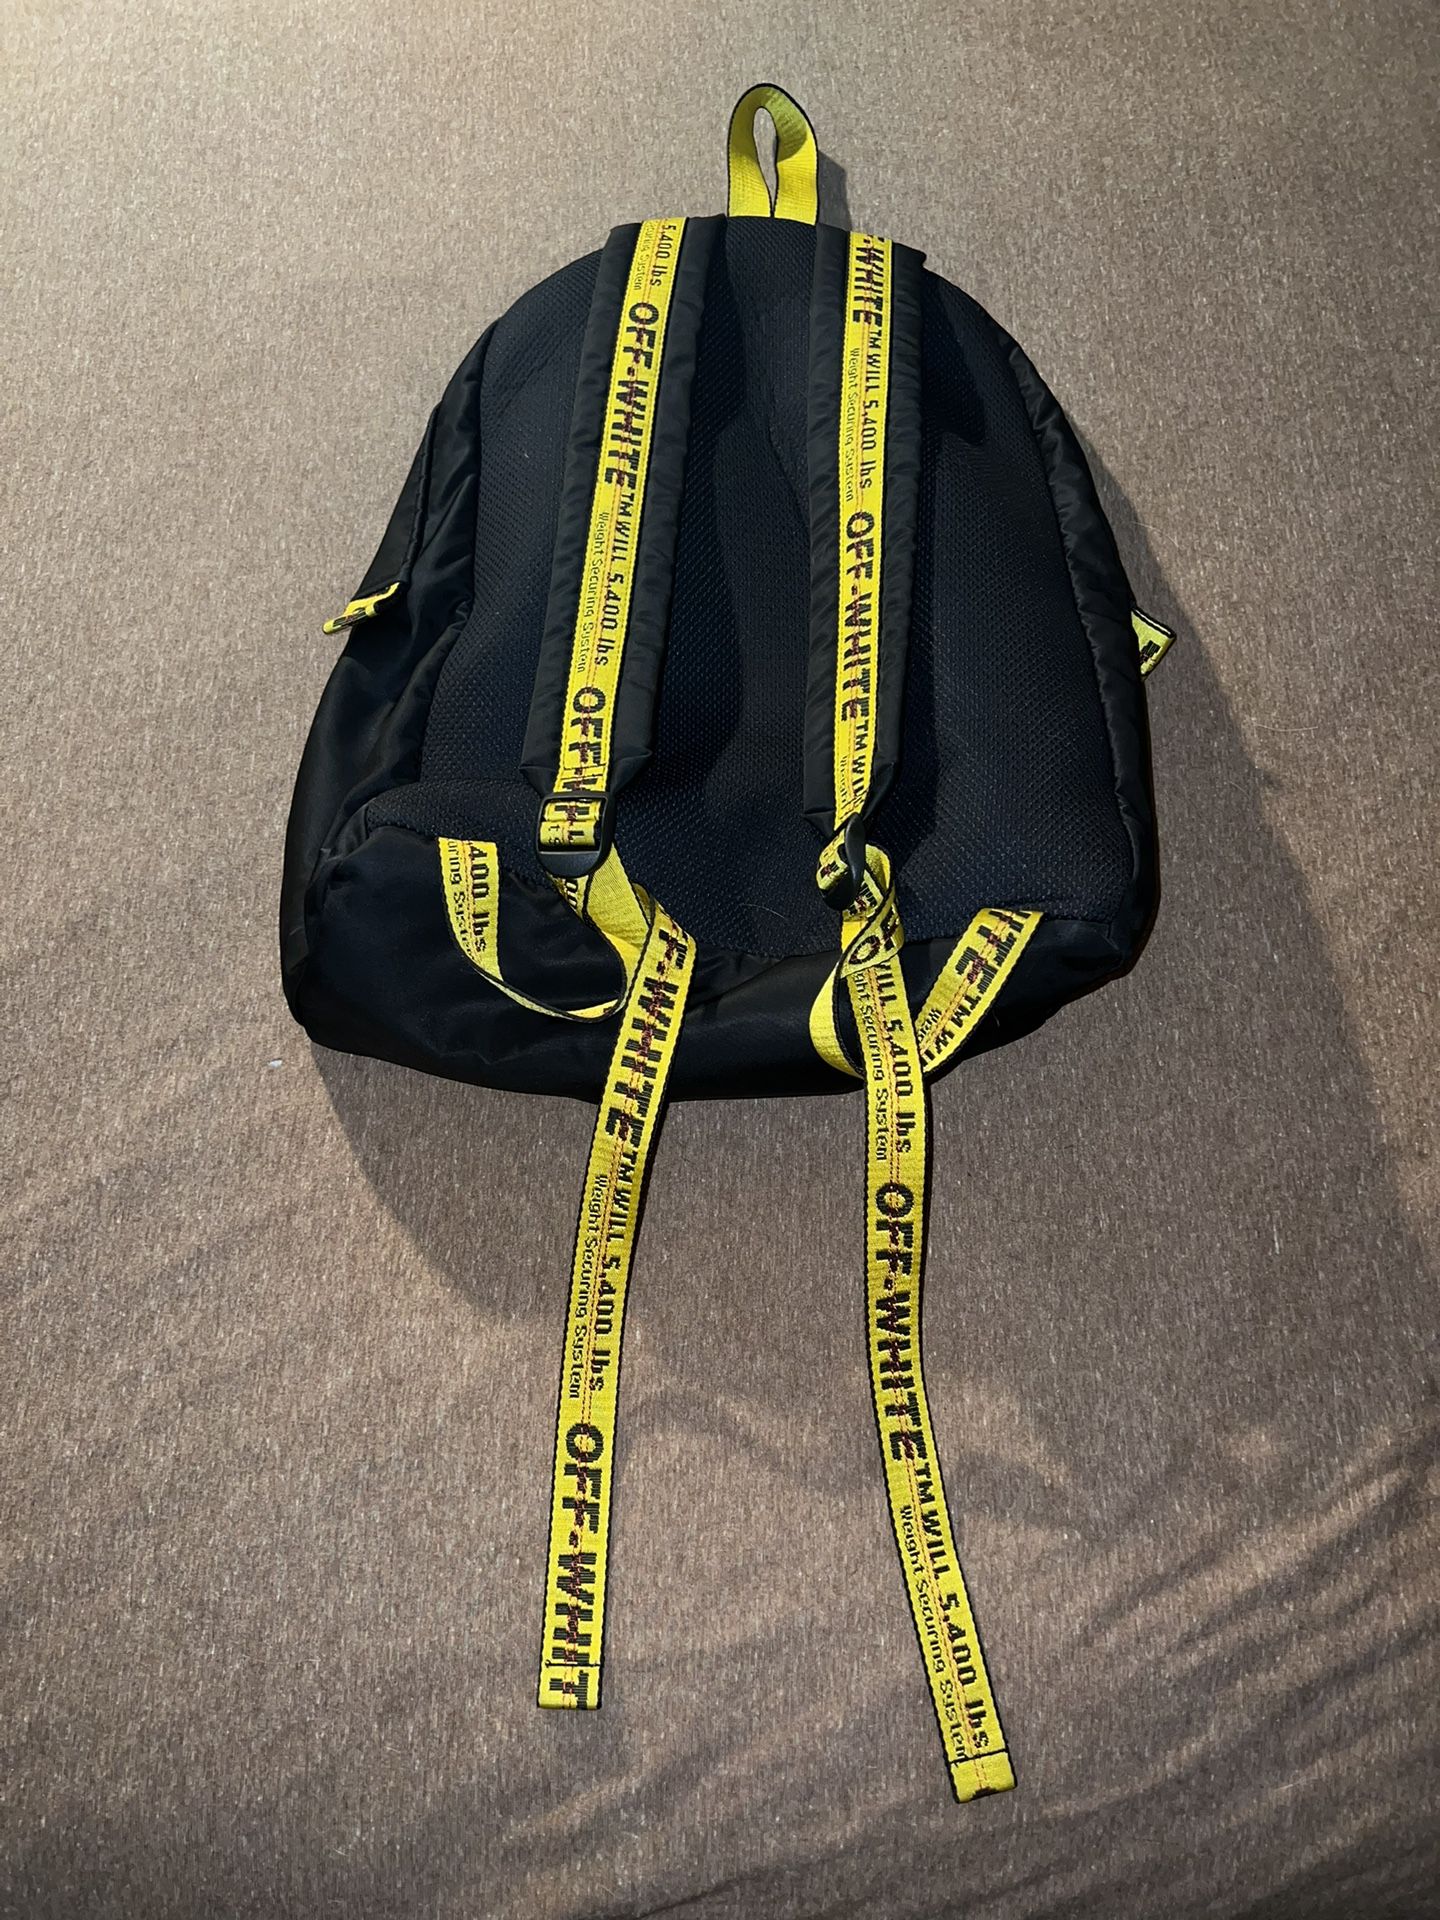 Off-white Backpack for Sale in New York, NY - OfferUp